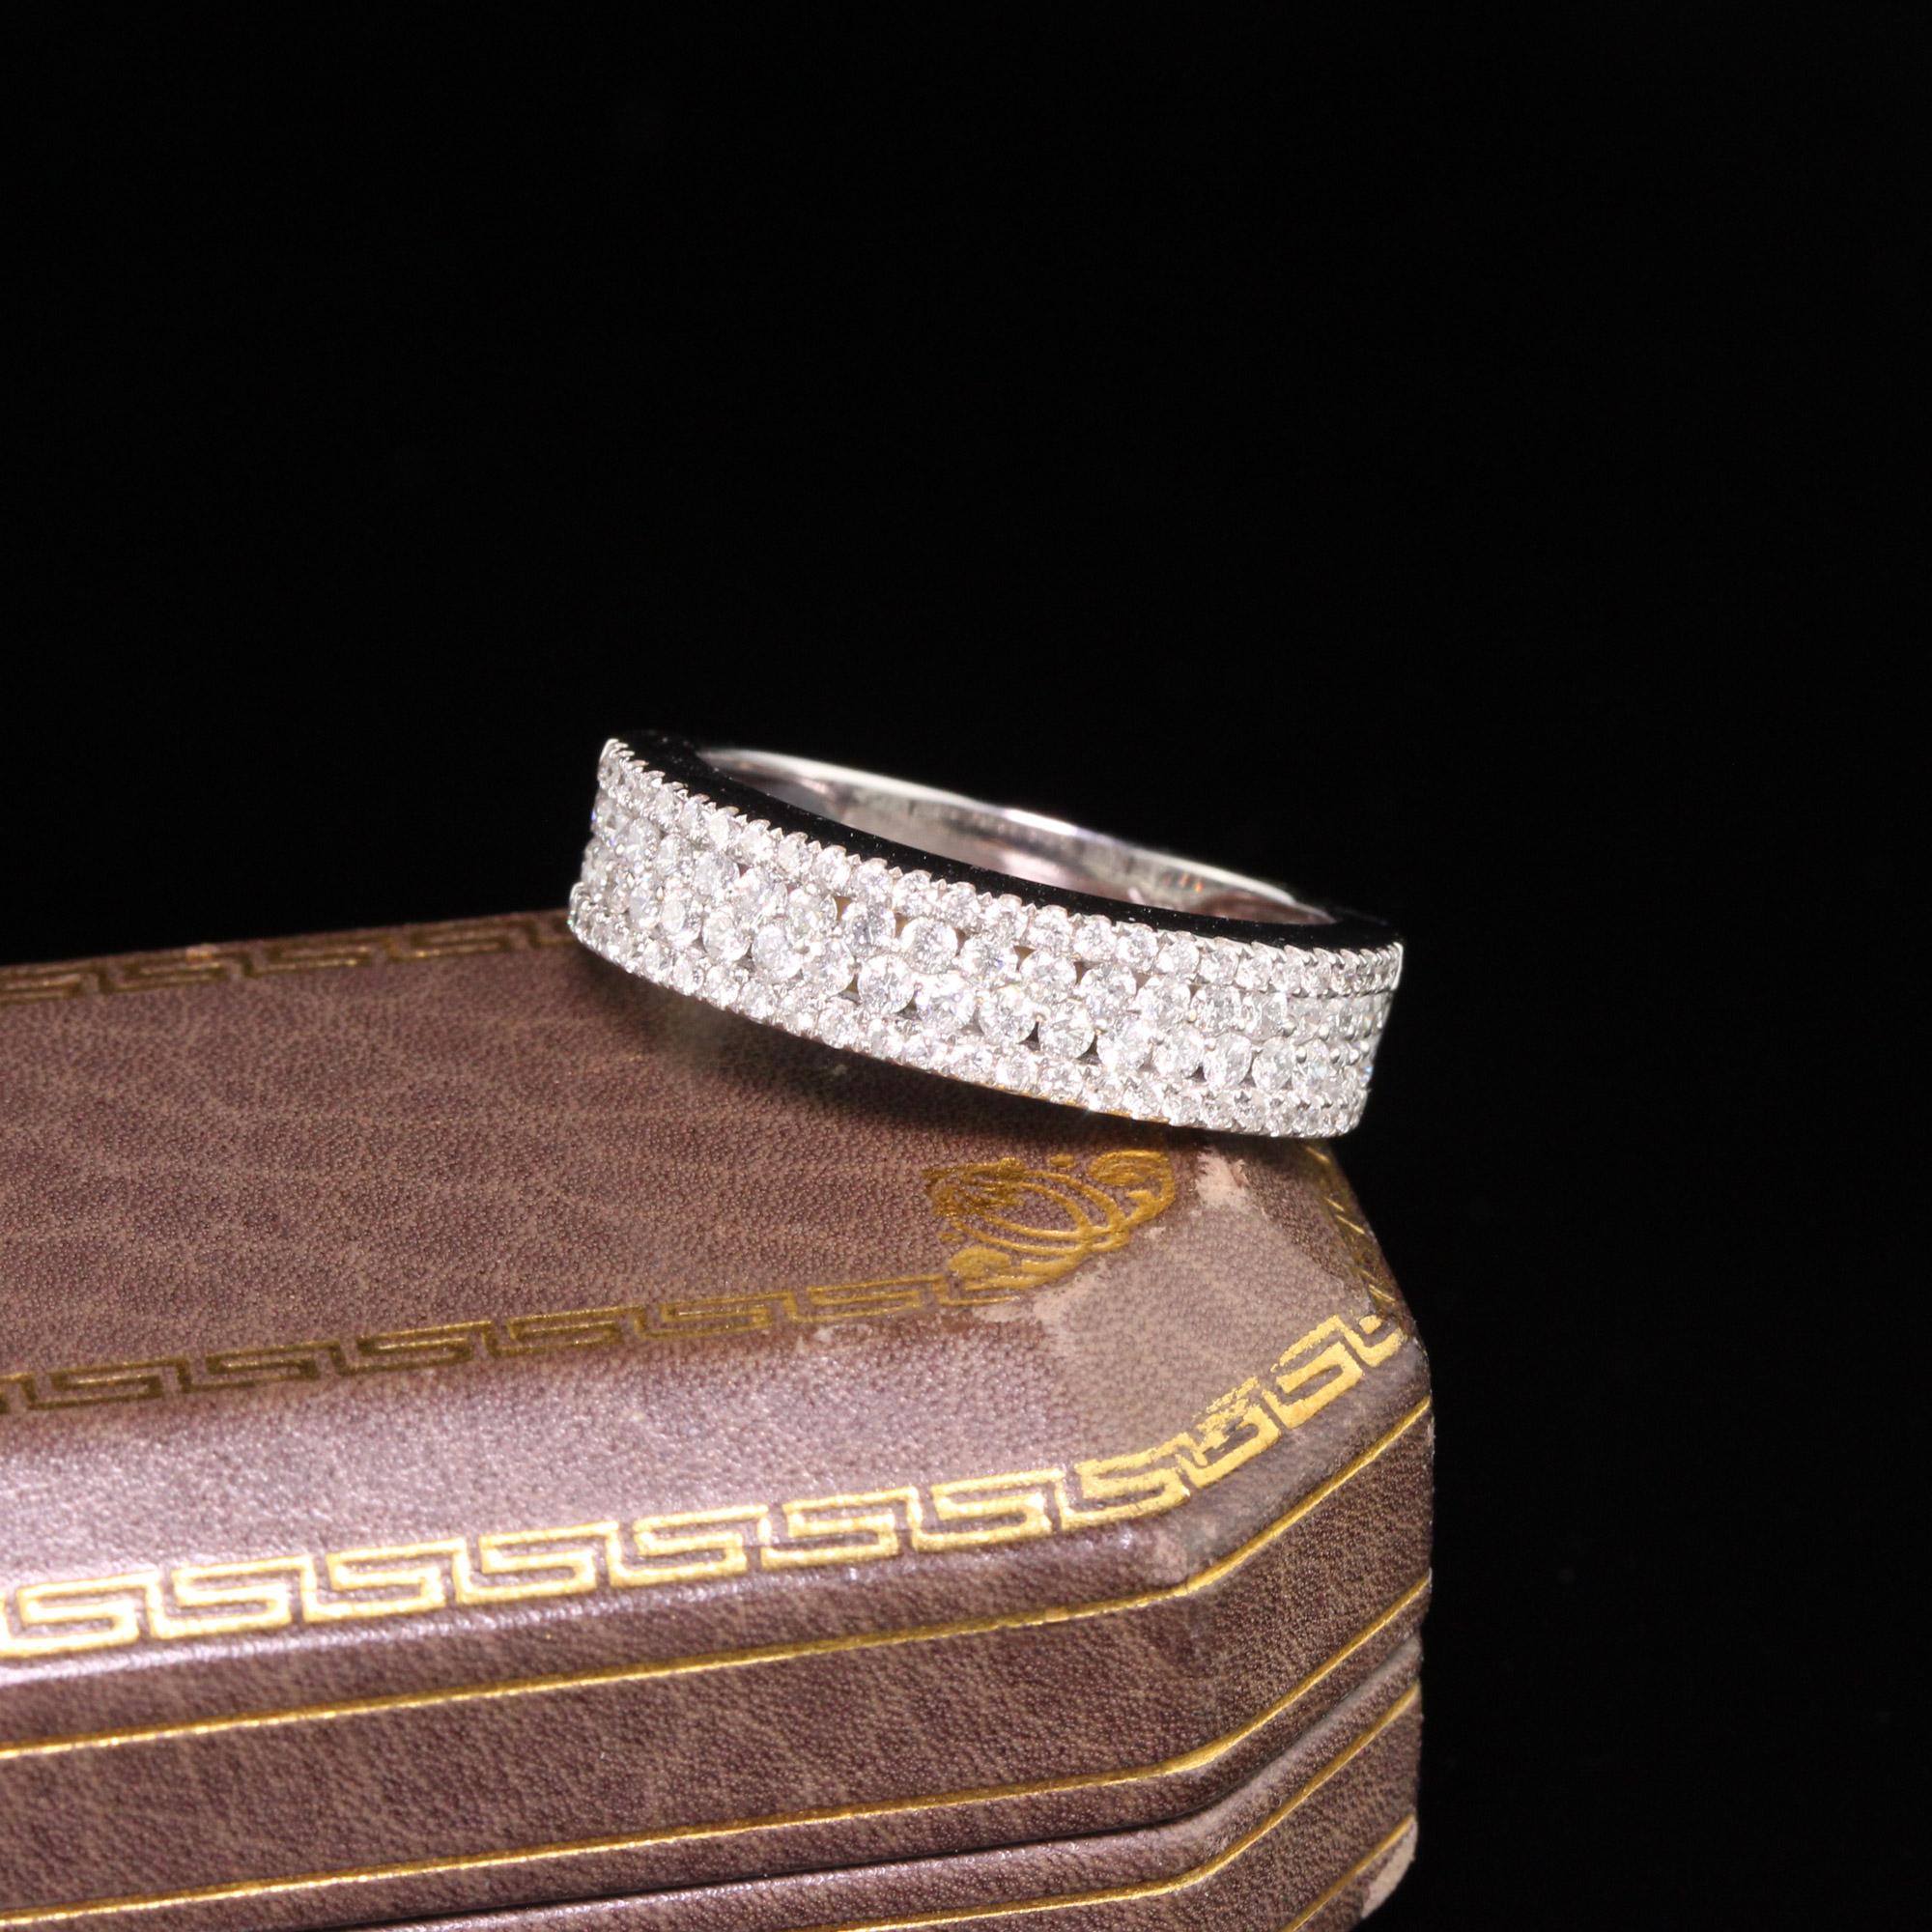 Dazzling four-row diamond band with white gold mounting  

Metal: White Gold

Weight: 4.8 Grams

Total Diamond Weight: Approximately 1 ct

Diamond Color: H

Diamond Clarity: VS2

Ring Size: 7 (sizeable)

Measurements: 5.3 x 3.6 mm